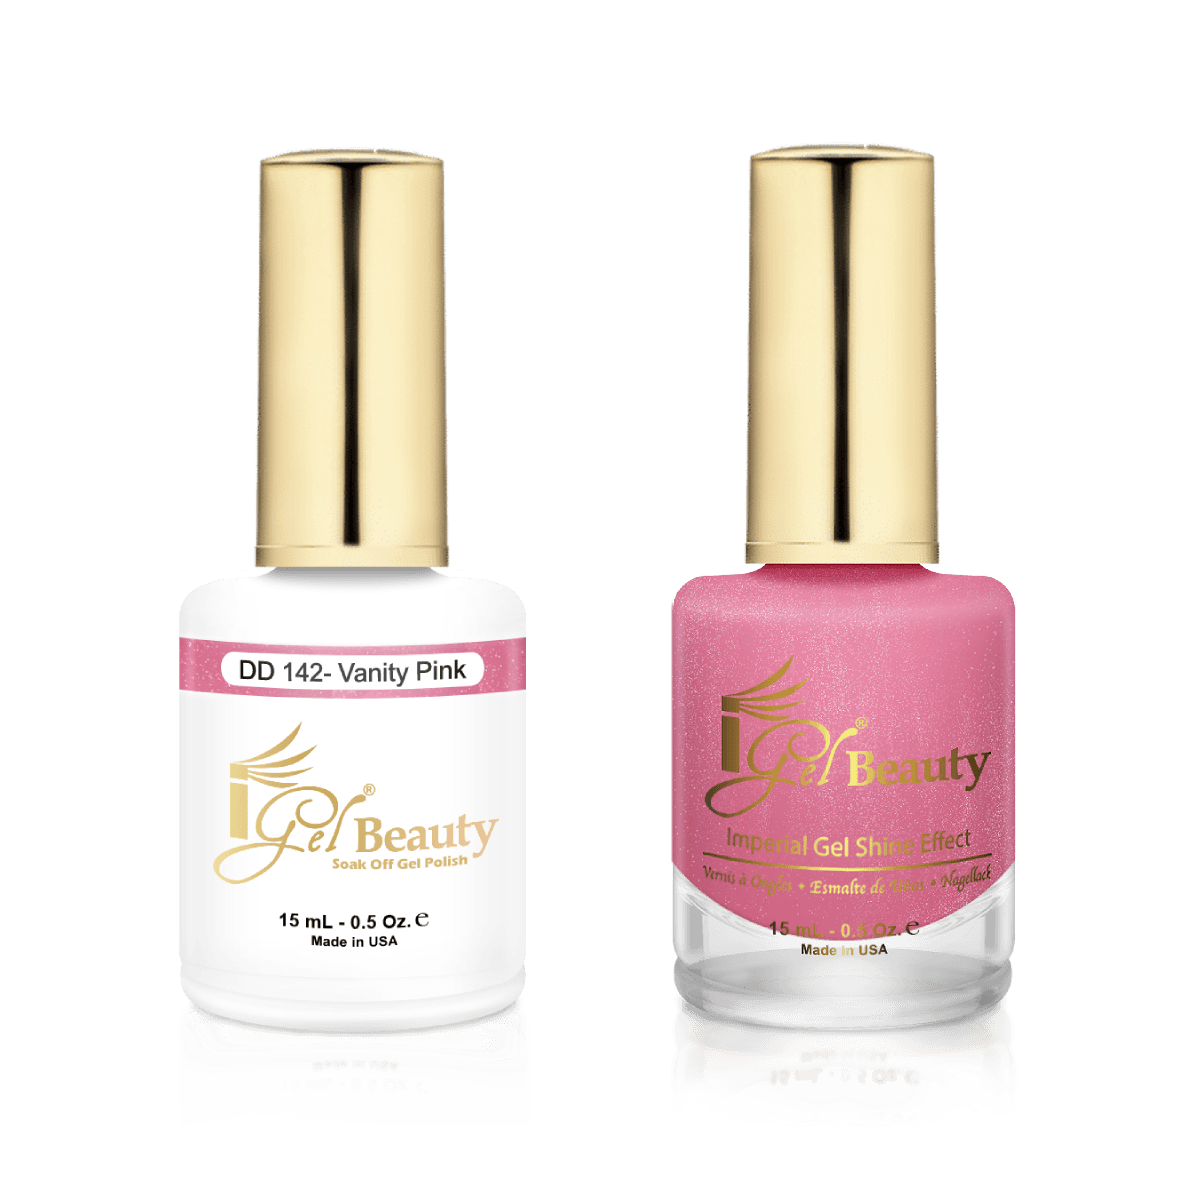 IGel Duo Gel Polish + Matching Nail Lacquer DD 142 VANITY PINK